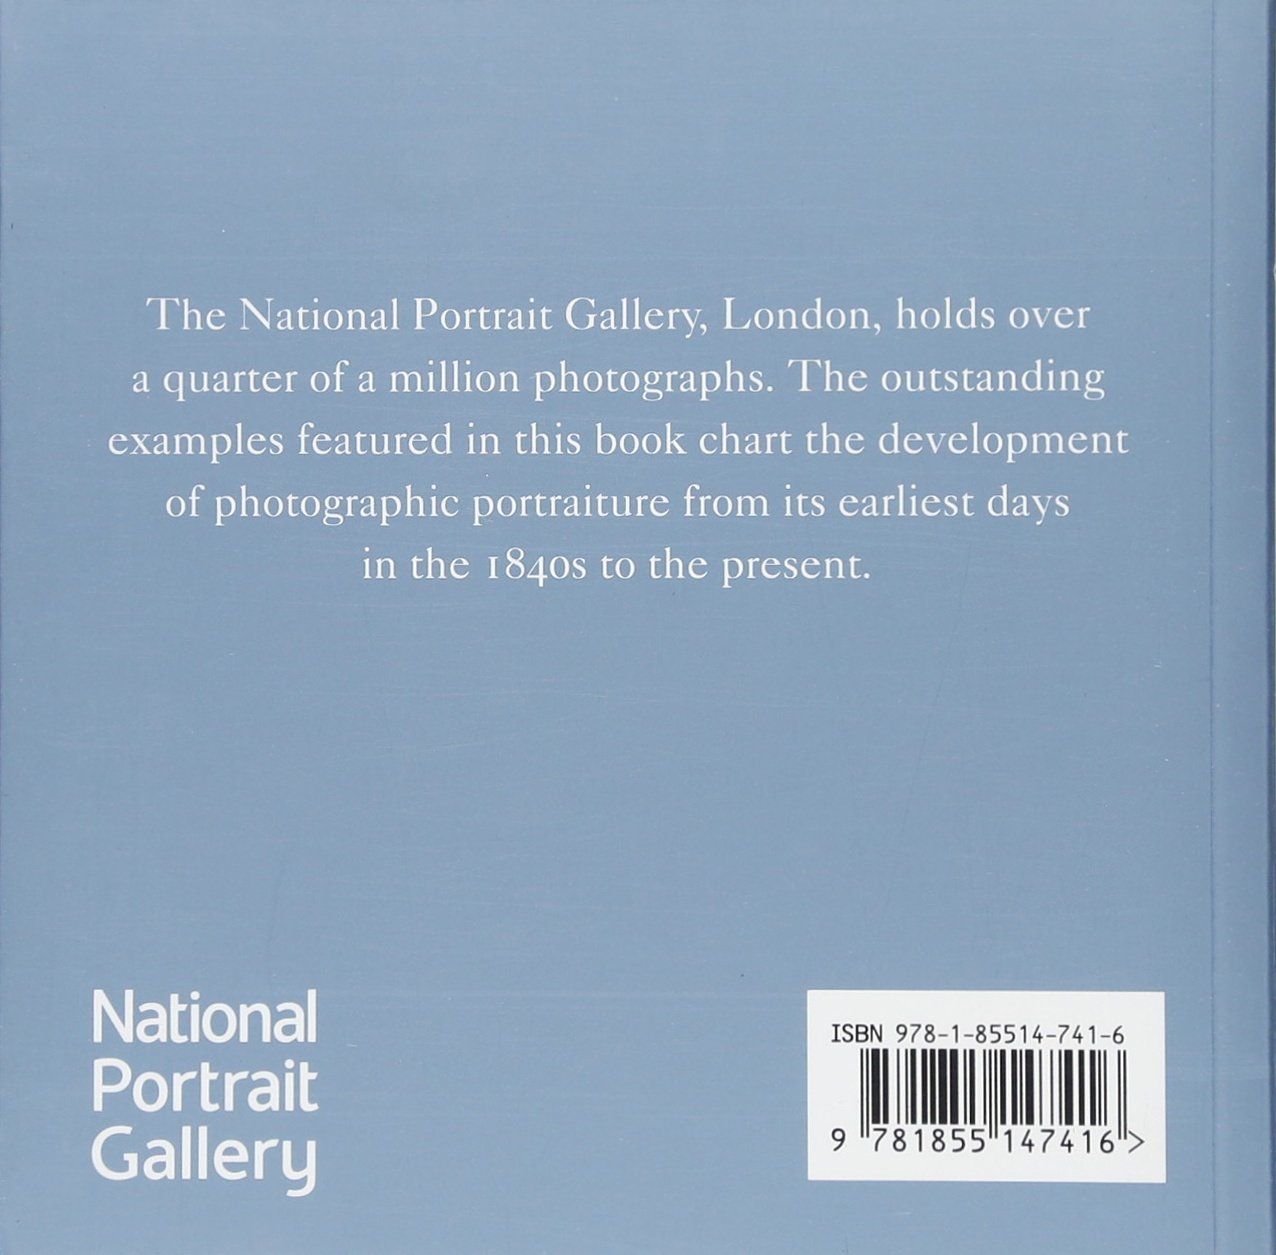  100 Photographs_National Portrait Gallery_9781855147416_National Portrait Gallery Publications 